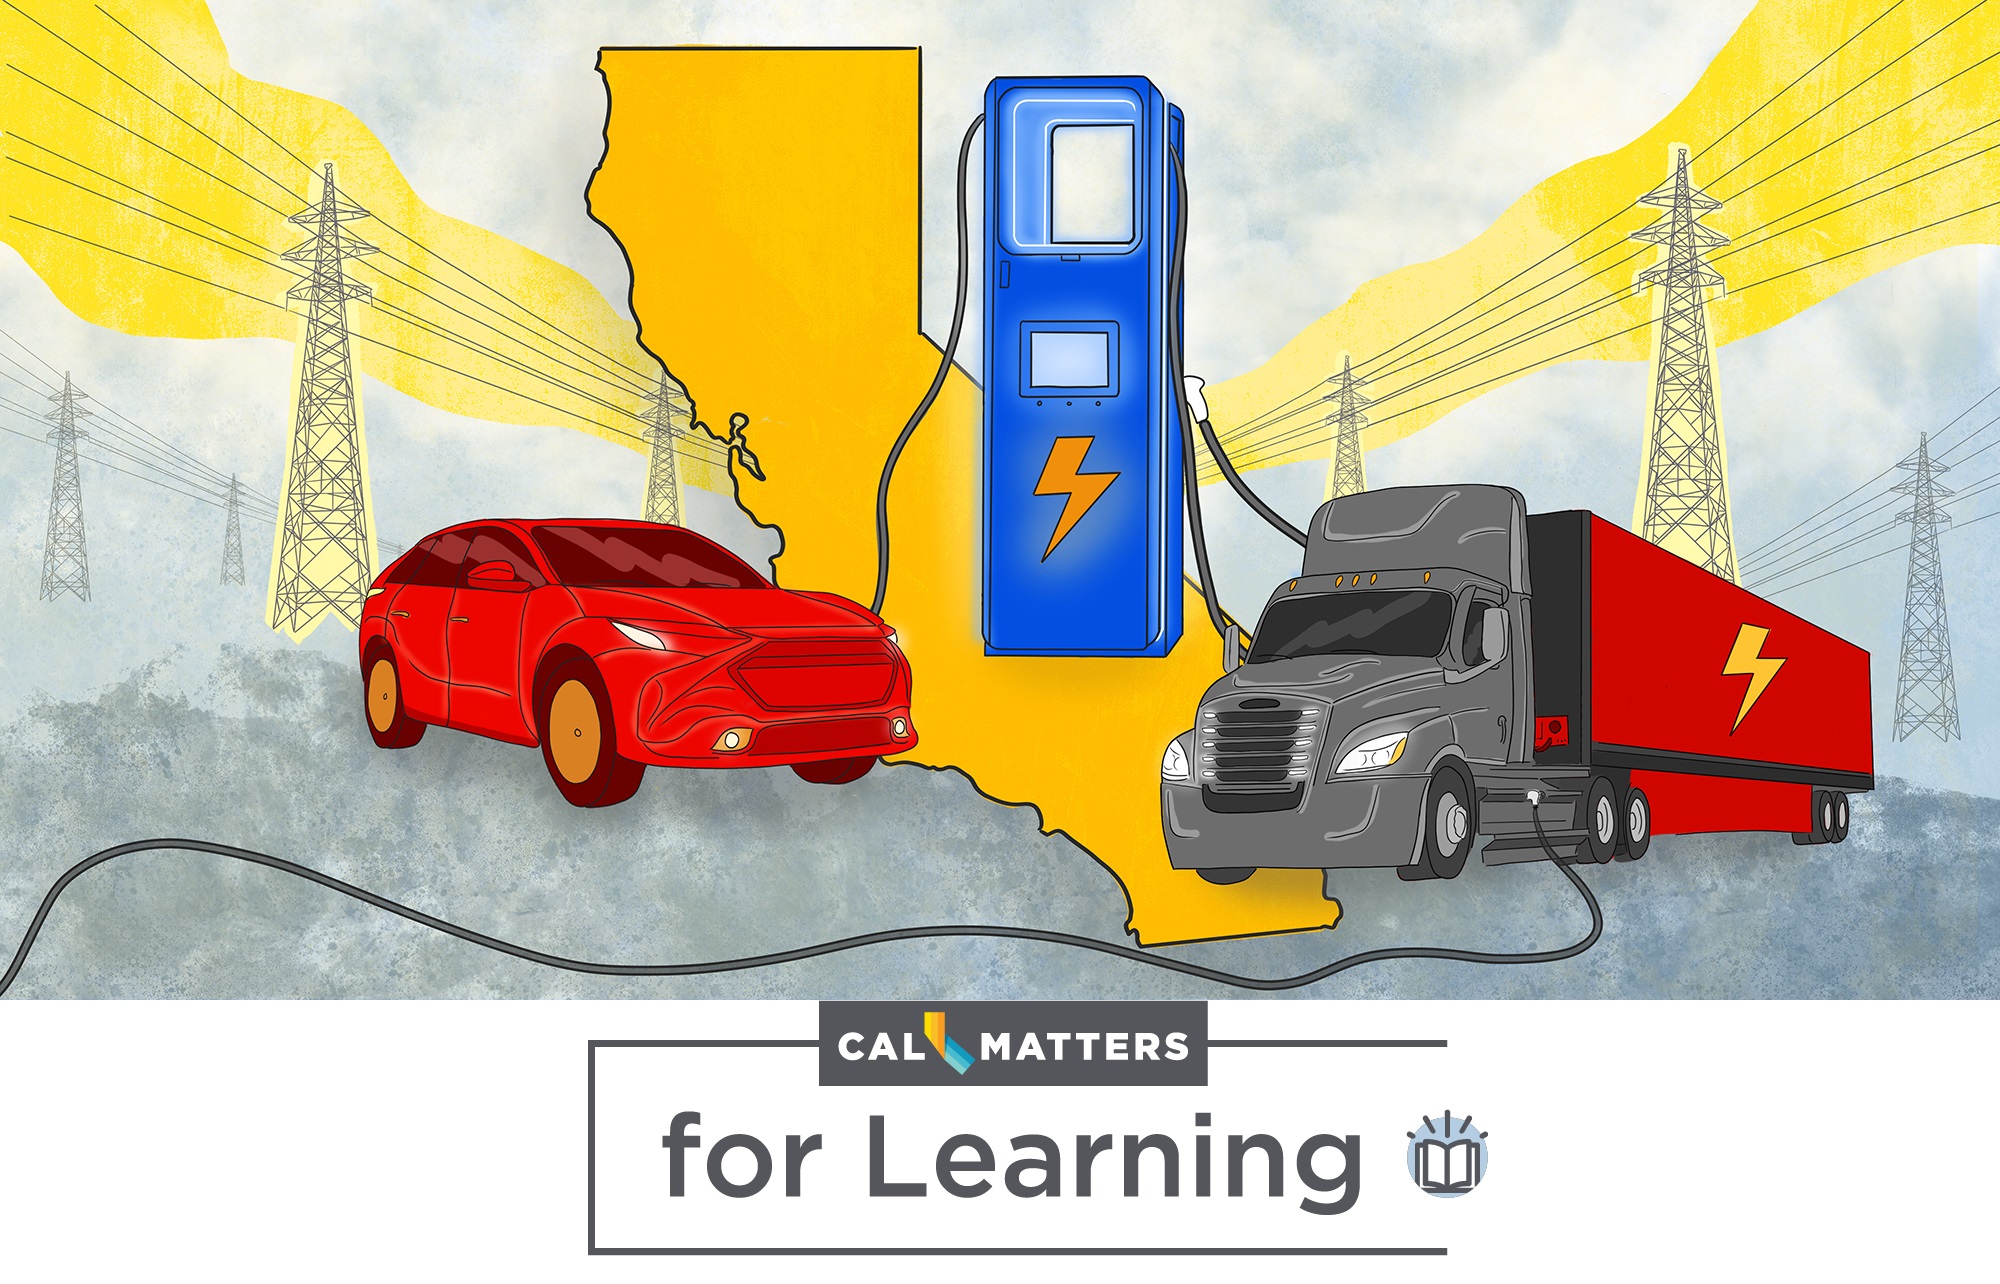 two electric vehicles charging, cal matters for learning logo at bottom